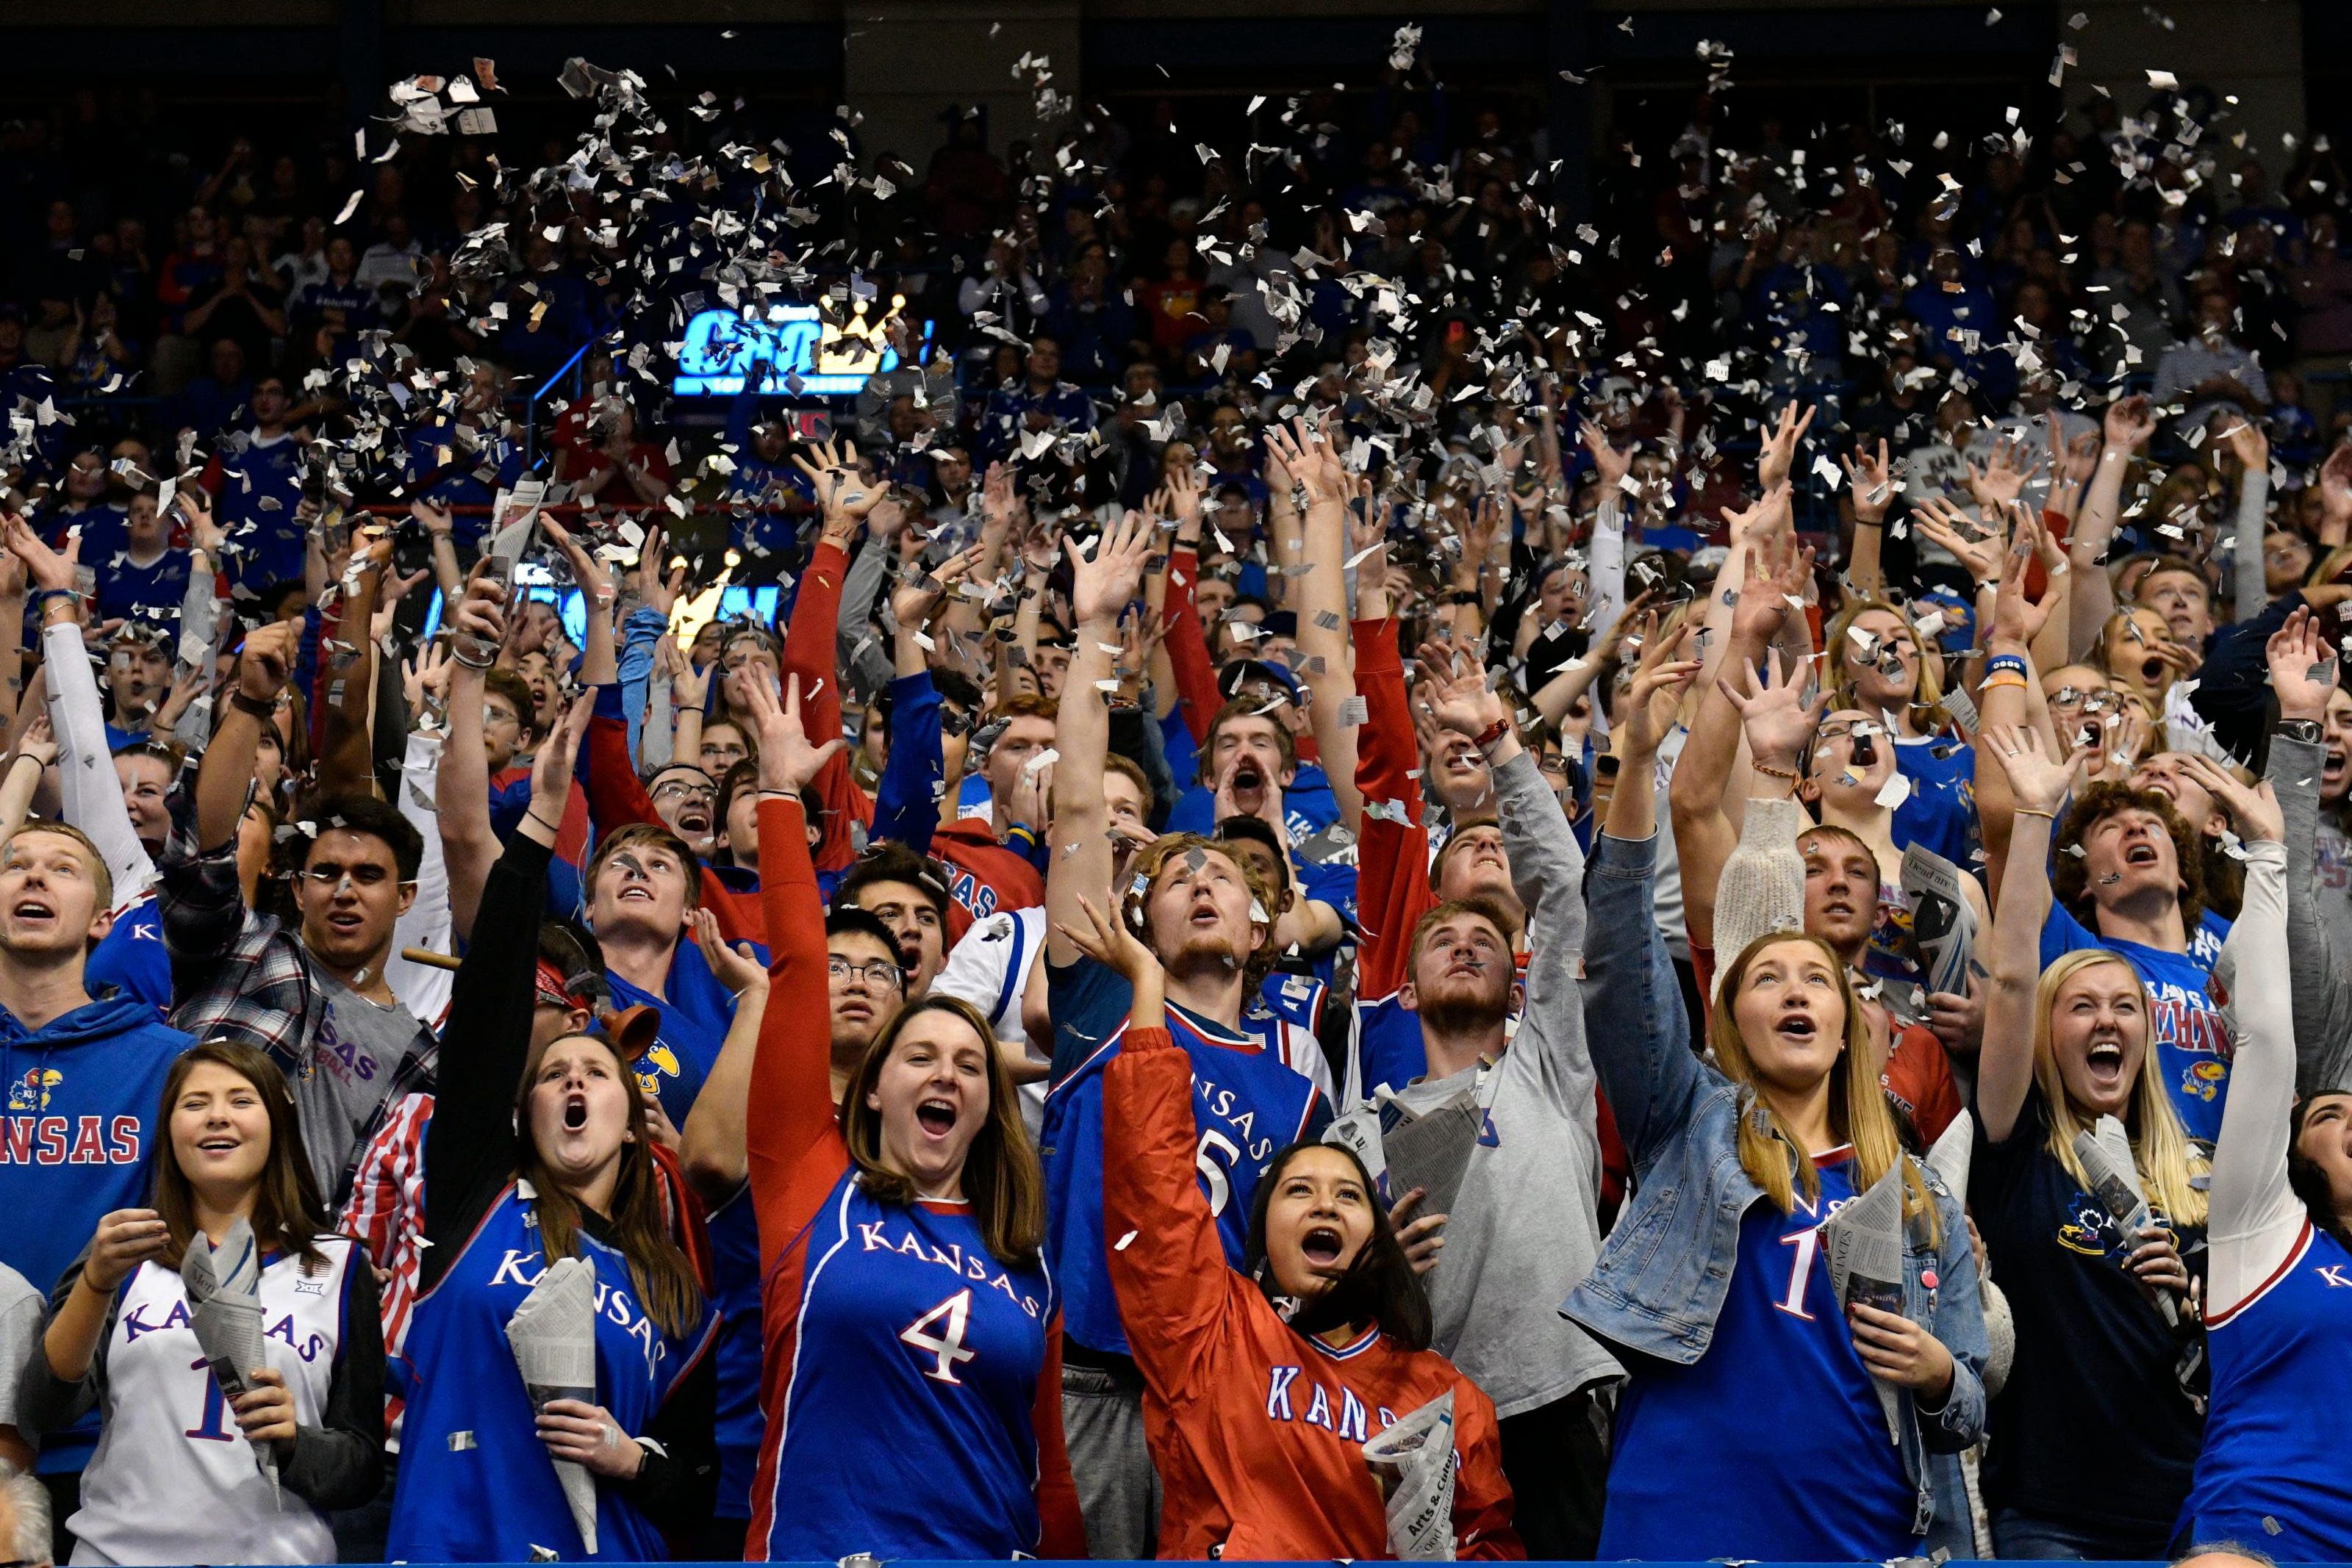 Kansas Basketball: 2020-21 season preview for the Jayhawks - Page 5